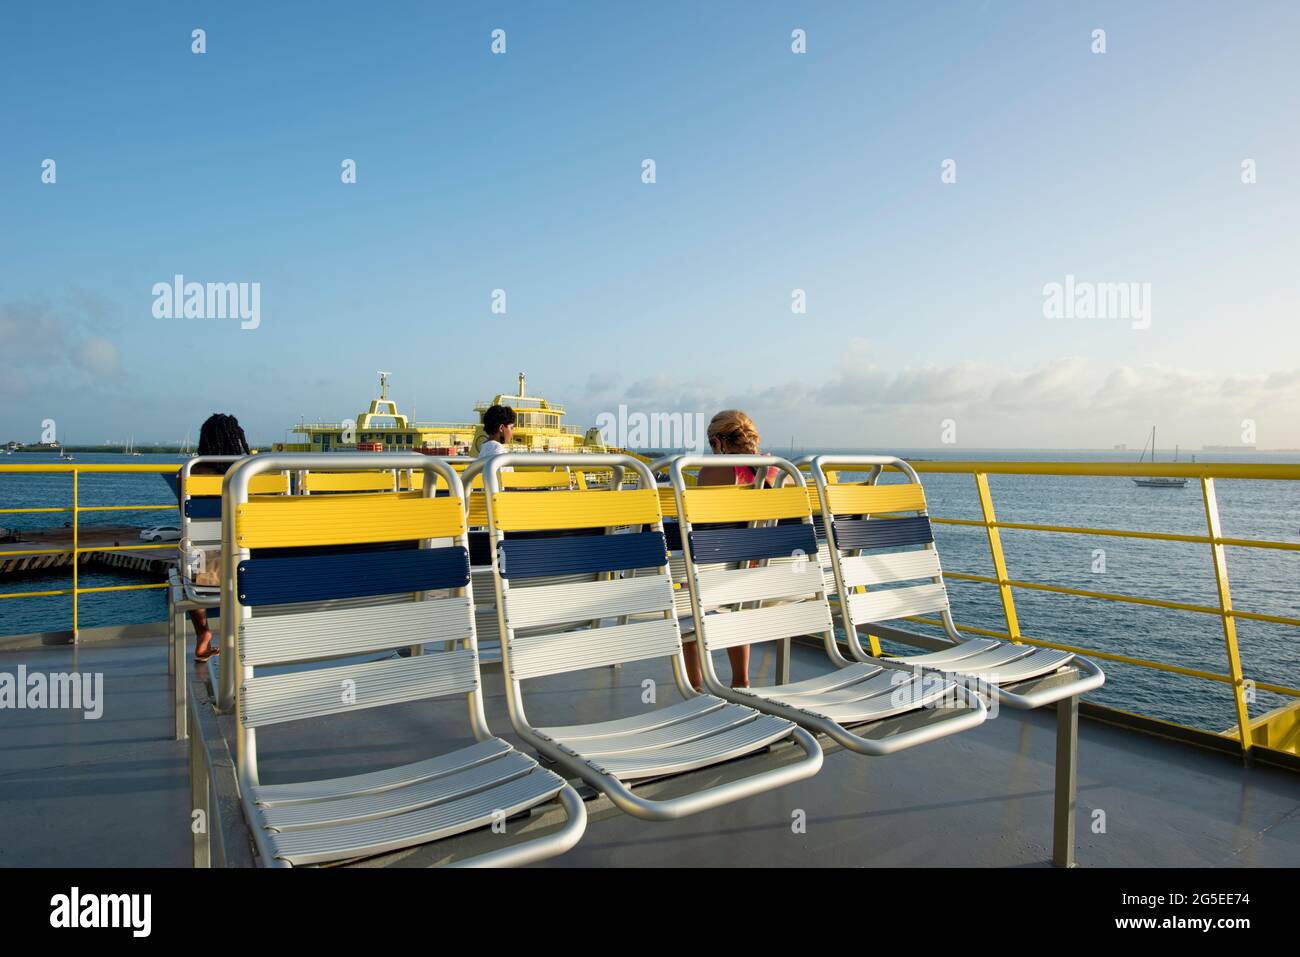 Upper deck of a RoRo ferry and three people sitting looking at the view of the harbor of Isla Mujeres, Mexico Stock Photo